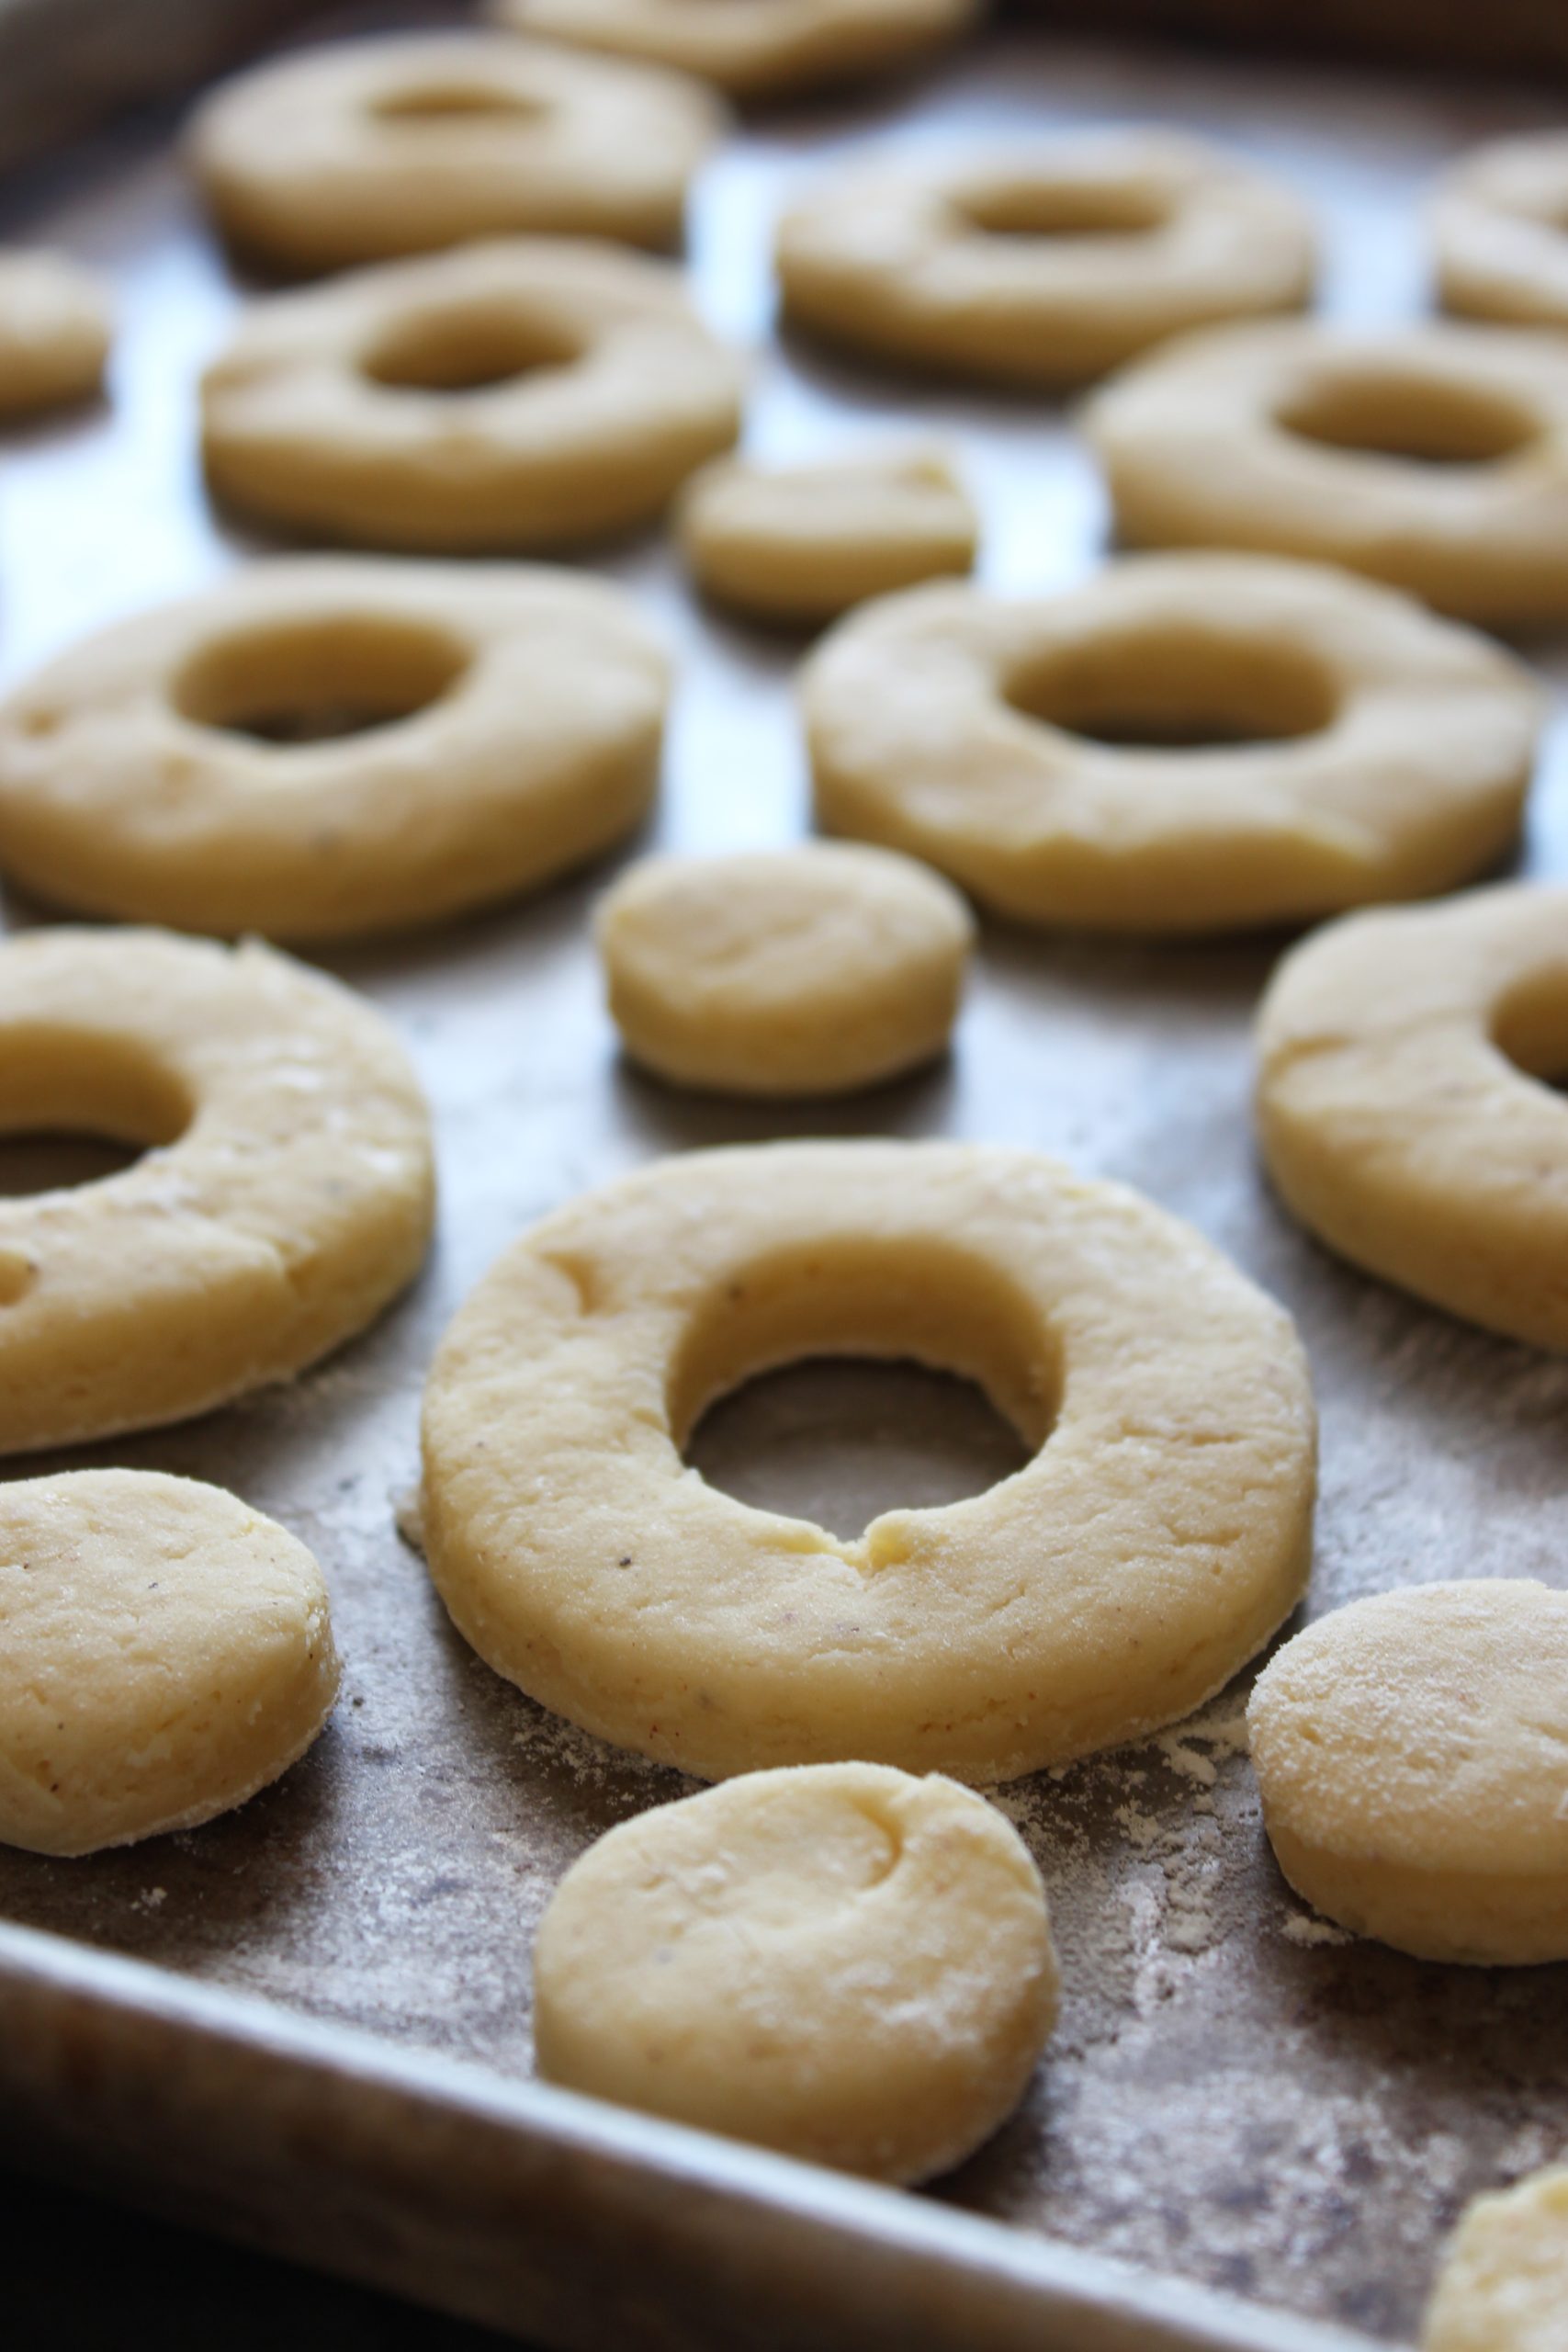 unbaked sour cream donuts, waiting to be fried